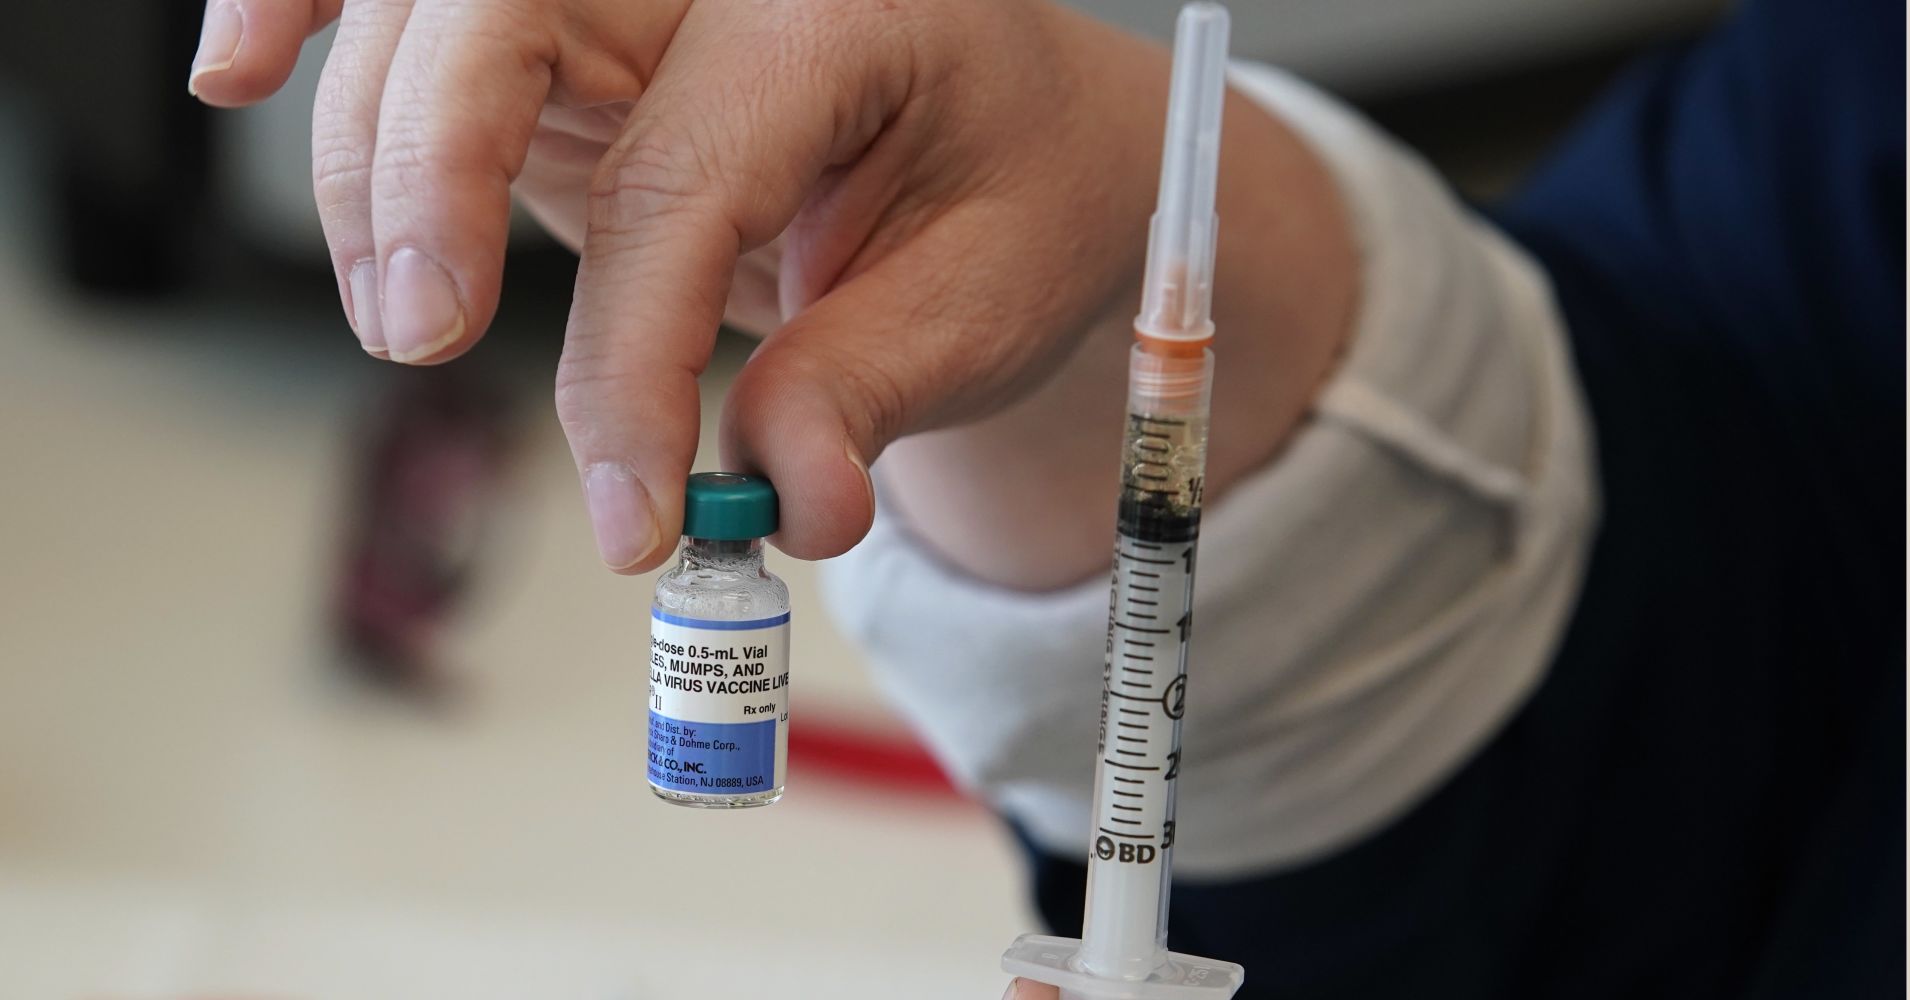 U.S. Measles Outbreak Boosts Vaccine Sales By More Than 50%